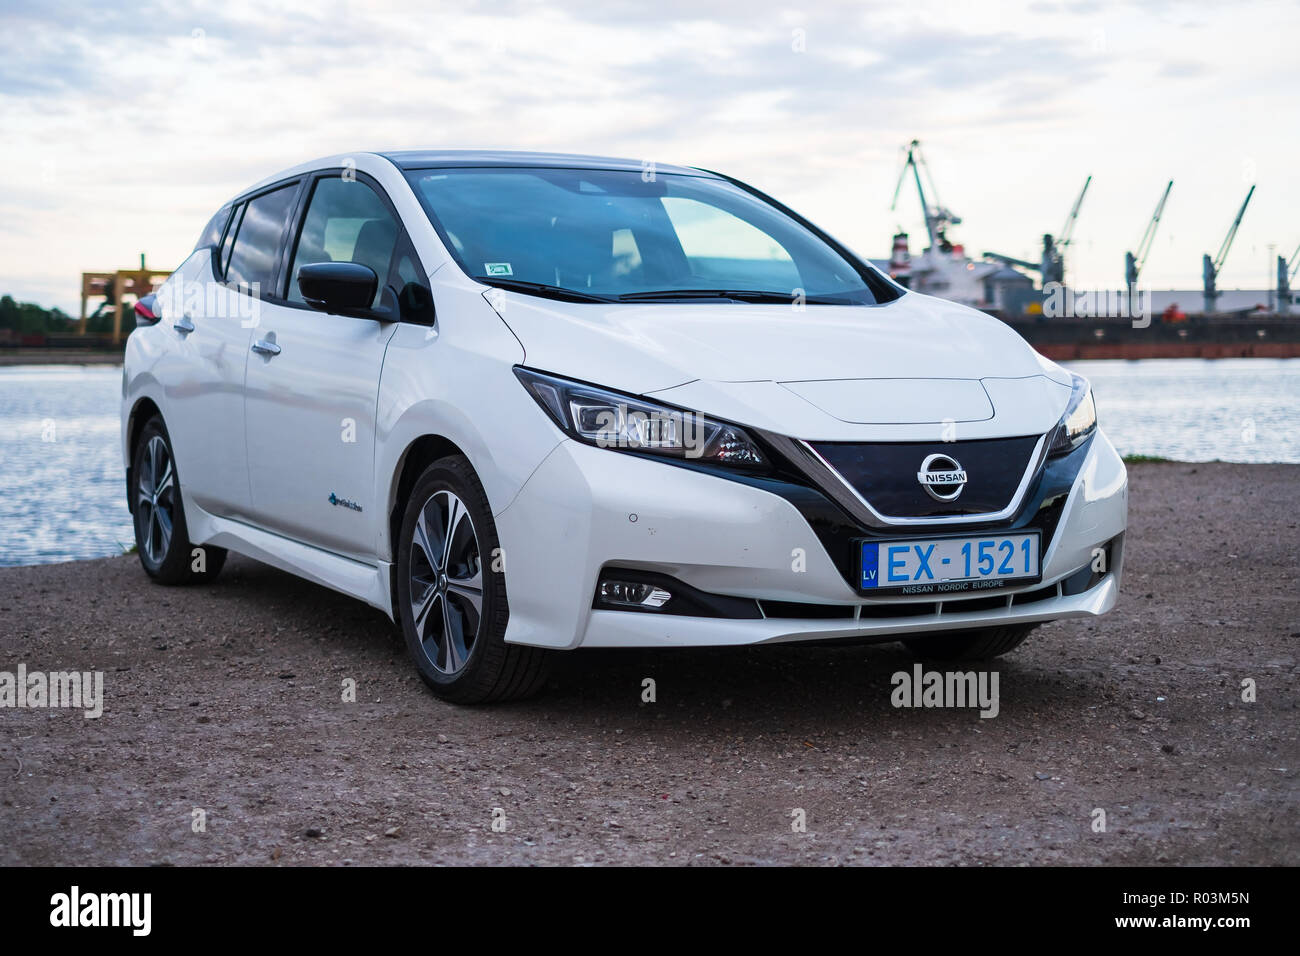 RIGA, MAY 2018 - Nissasn LEAF - fully electric zero emissions vehicle is displayed for editorial purposes. Stock Photo